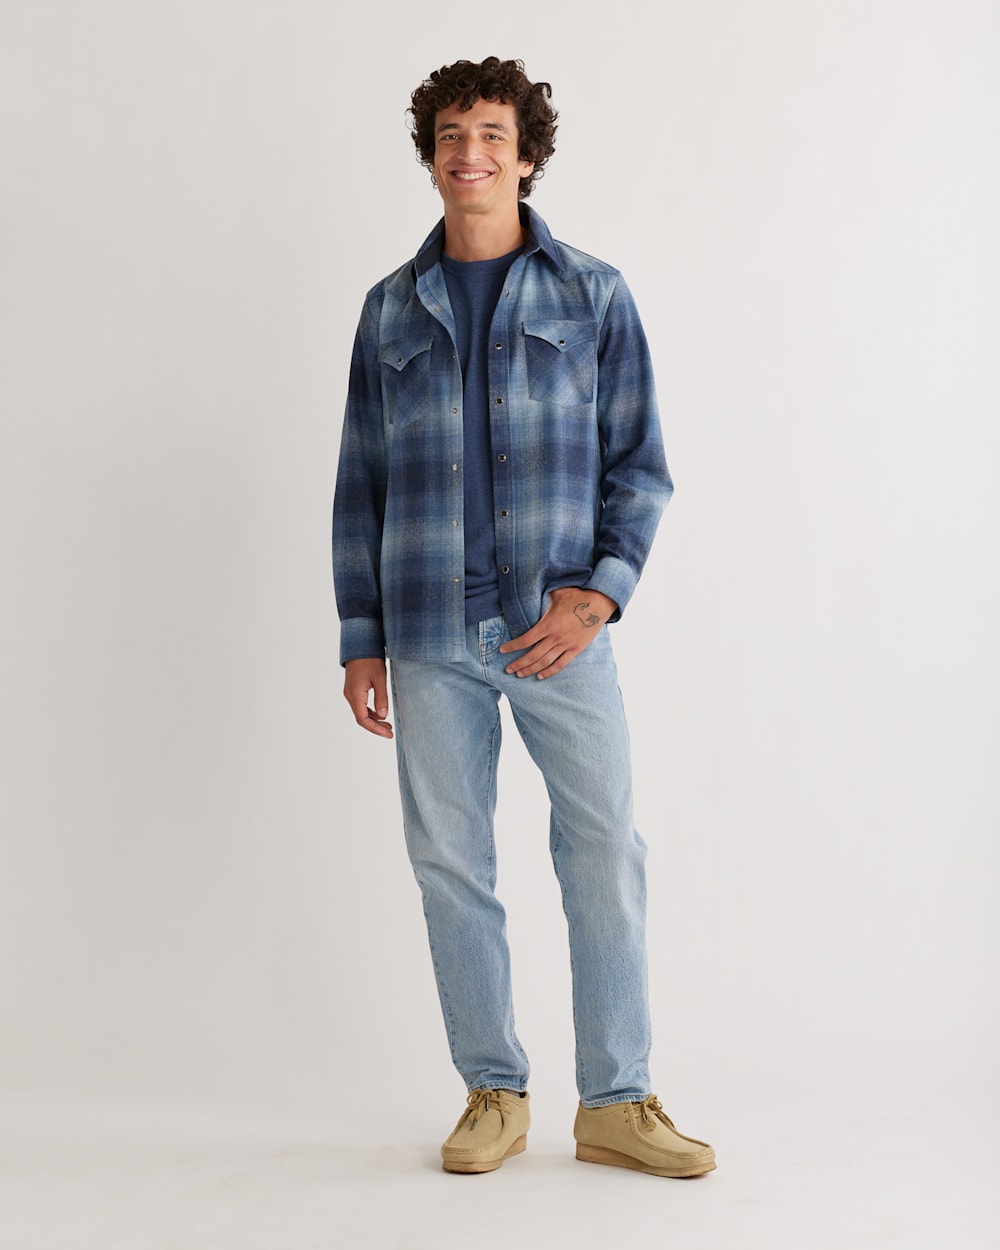 ALTERNATE VIEW OF MEN'S PLAID SNAP-FRONT WESTERN CANYON SHIRT IN NAVY MIX OMBRE image number 4